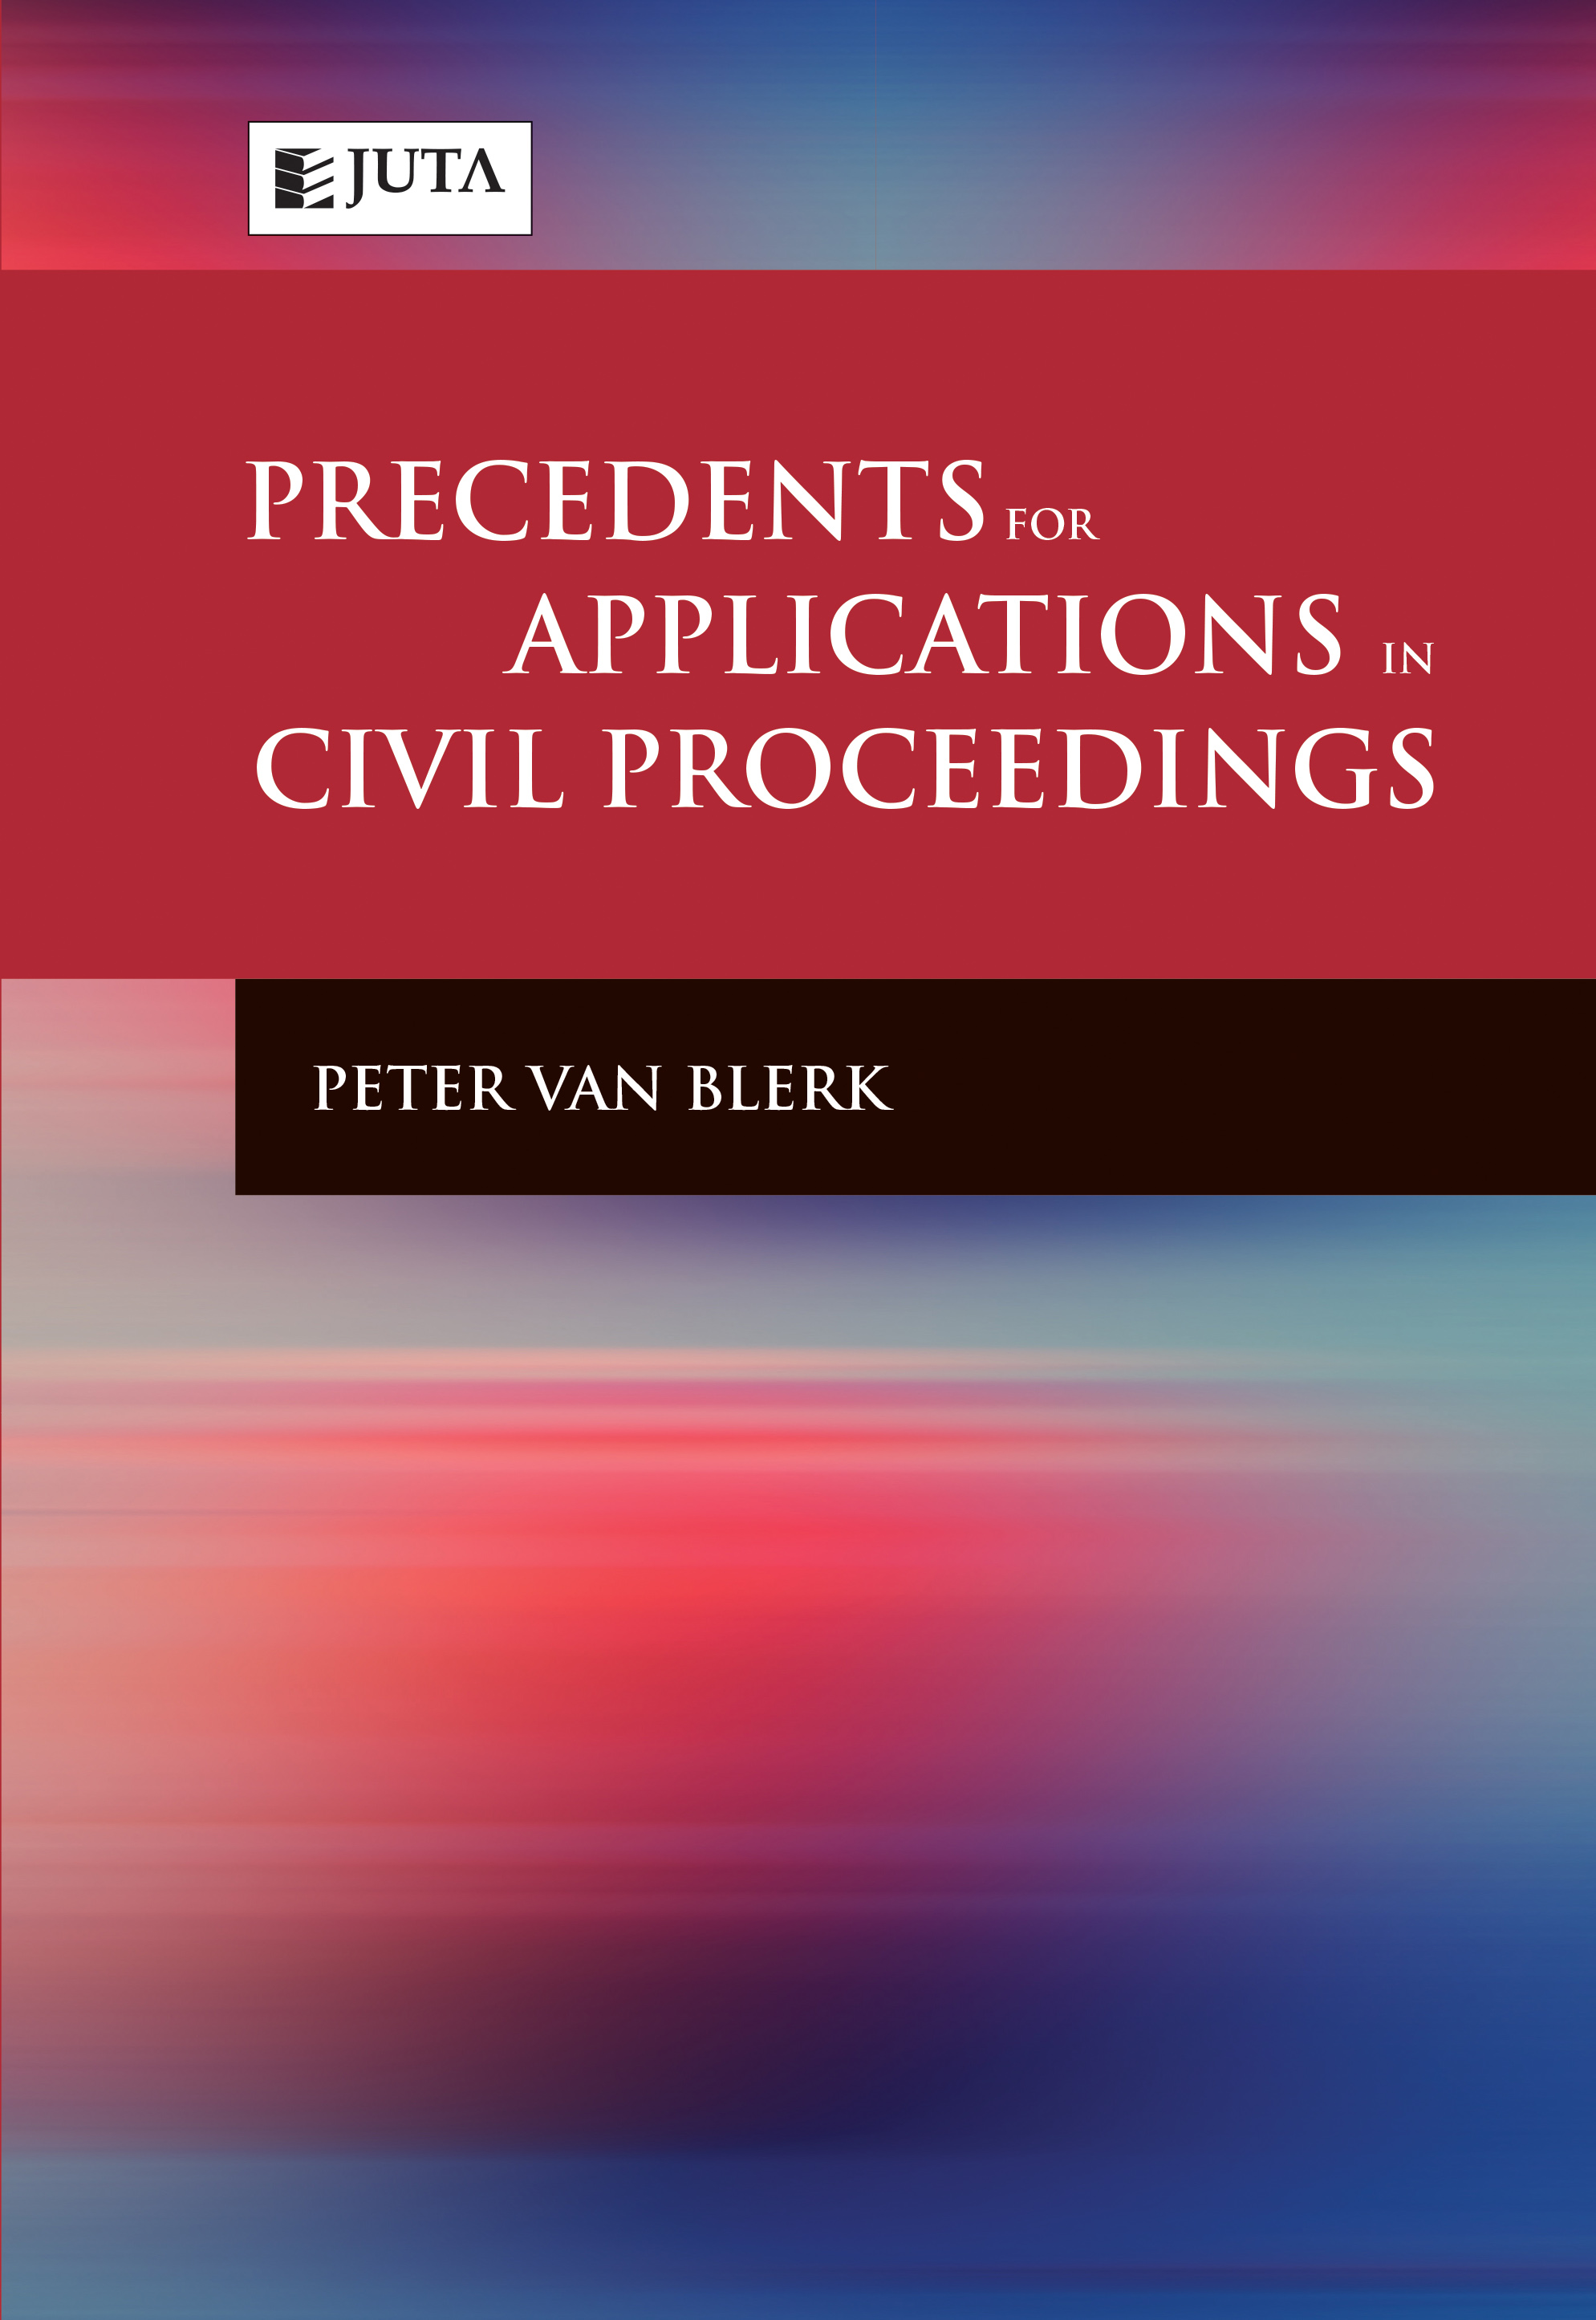 Precedents for Applications in Civil Proceedings